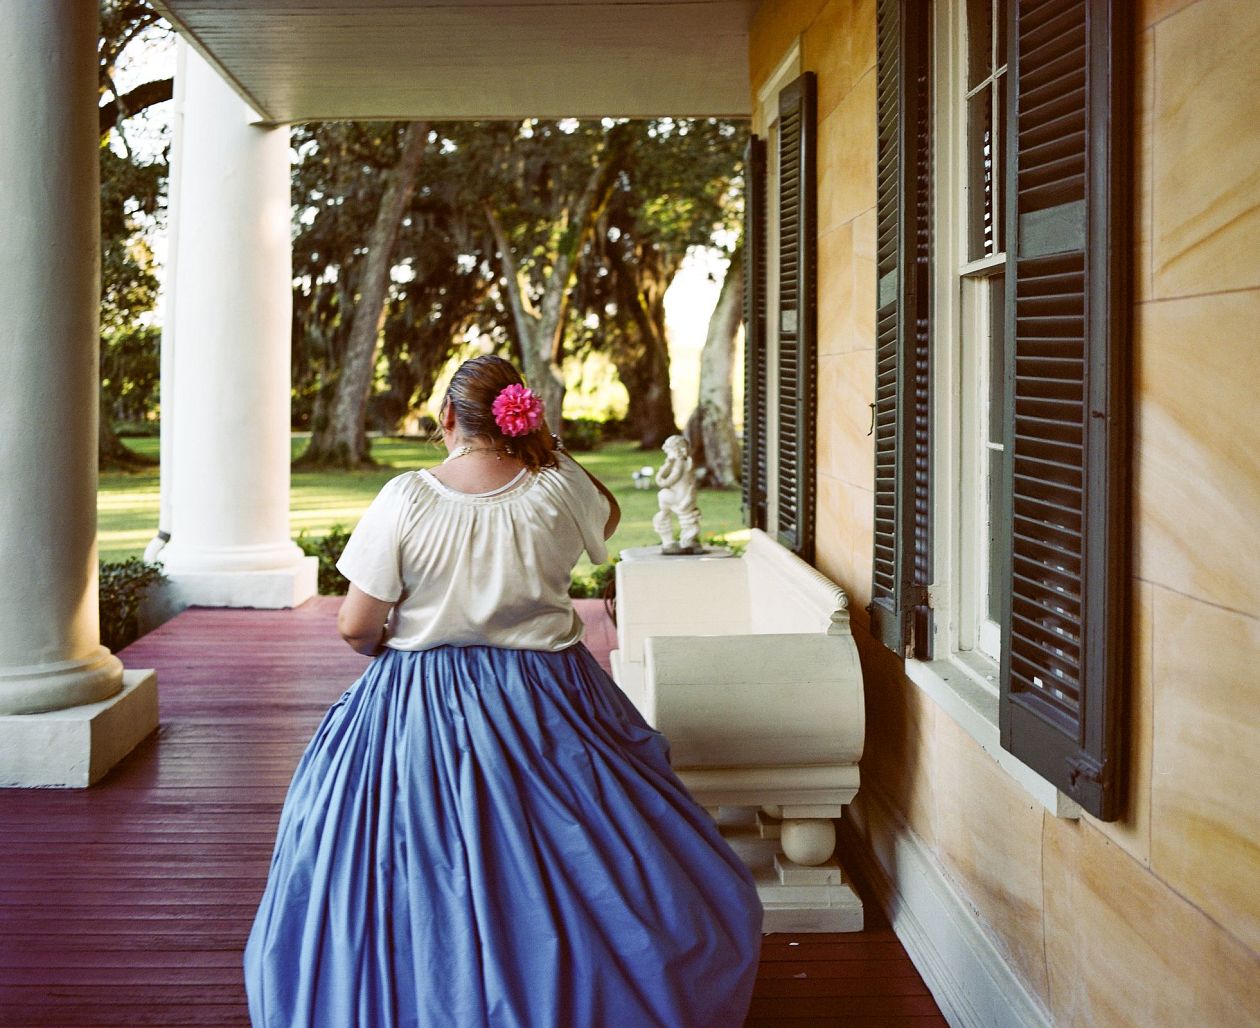 A woman in a long blue skirt and a pink headband stands on the porch of the house. Lafayette, Louisana